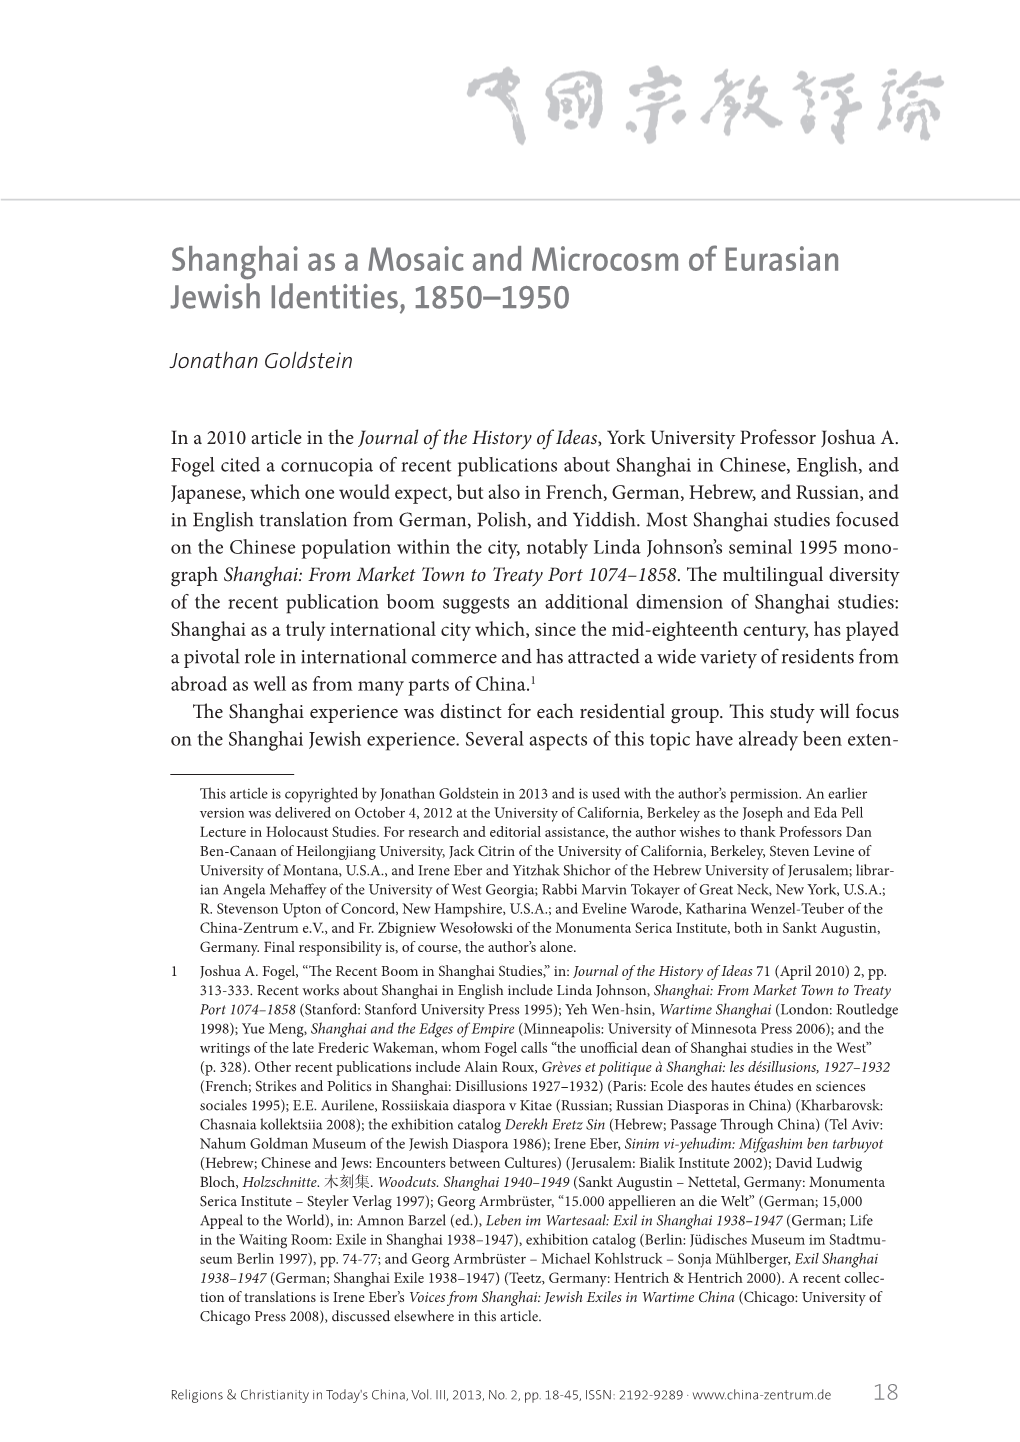 Shanghai As a Mosaic and Microcosm of Eurasian Jewish Identities, 1850–1950